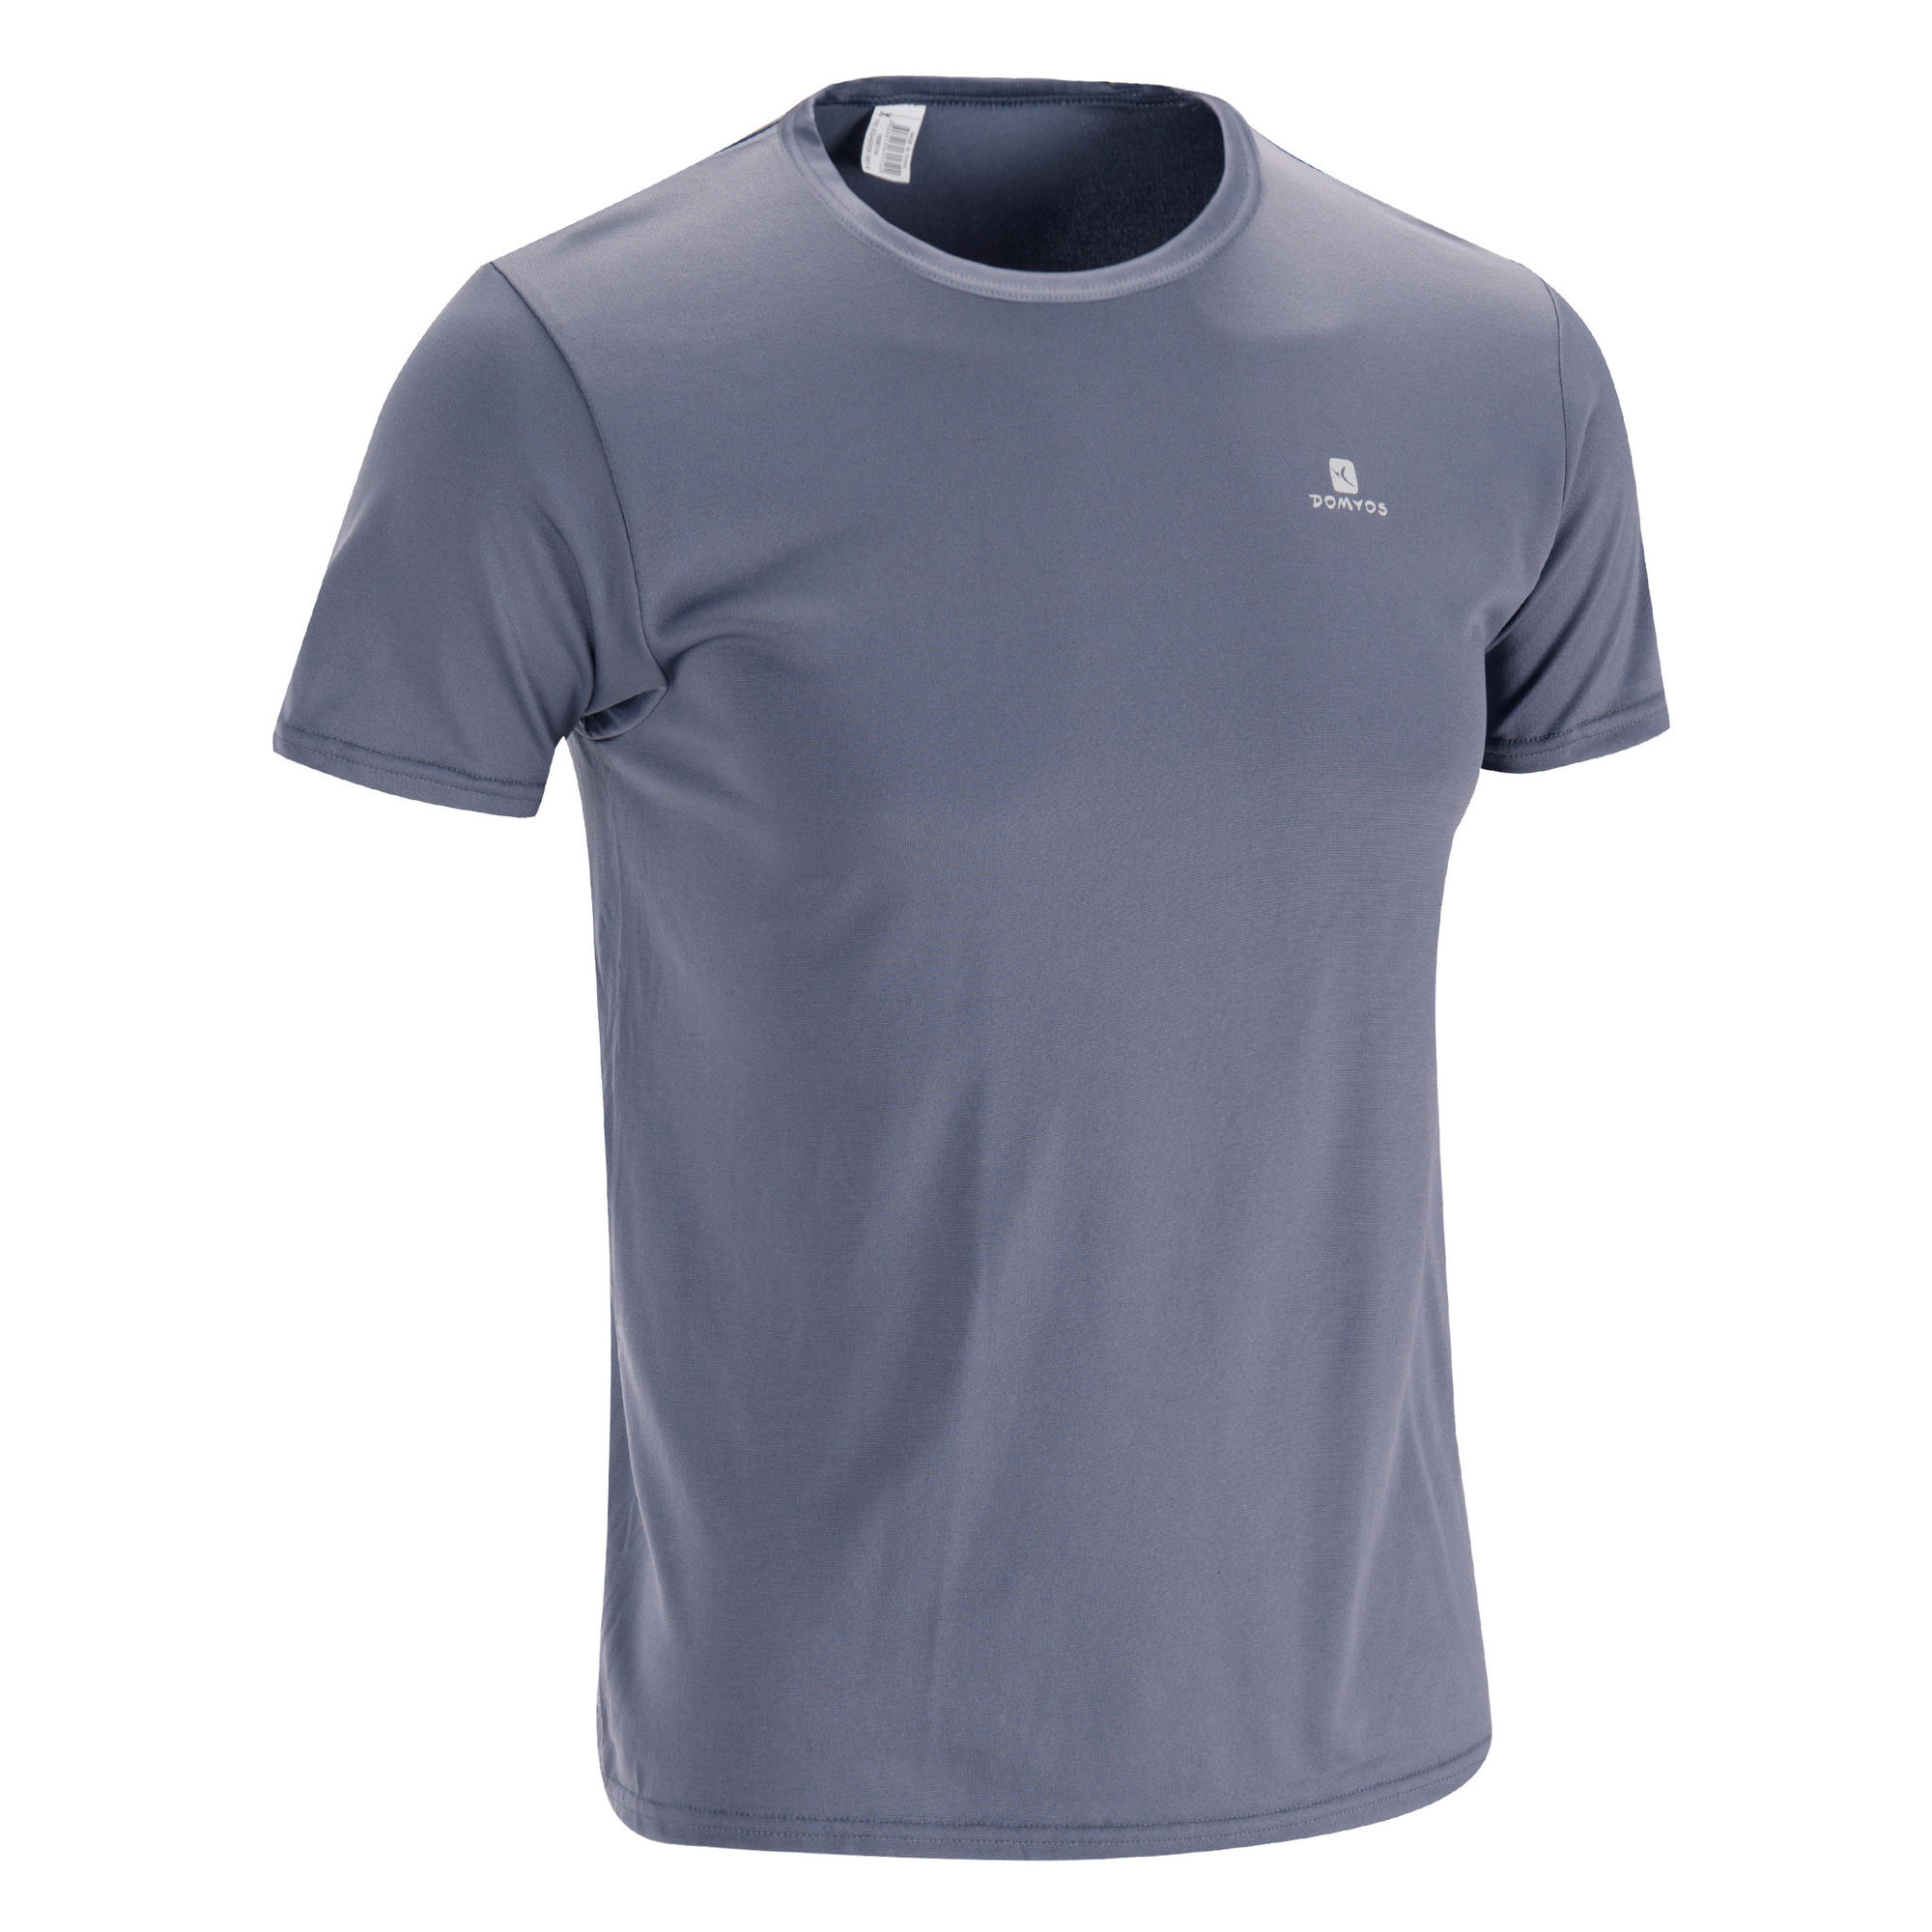 FTS100 Fitness Cardio T-Shirt - Grey 